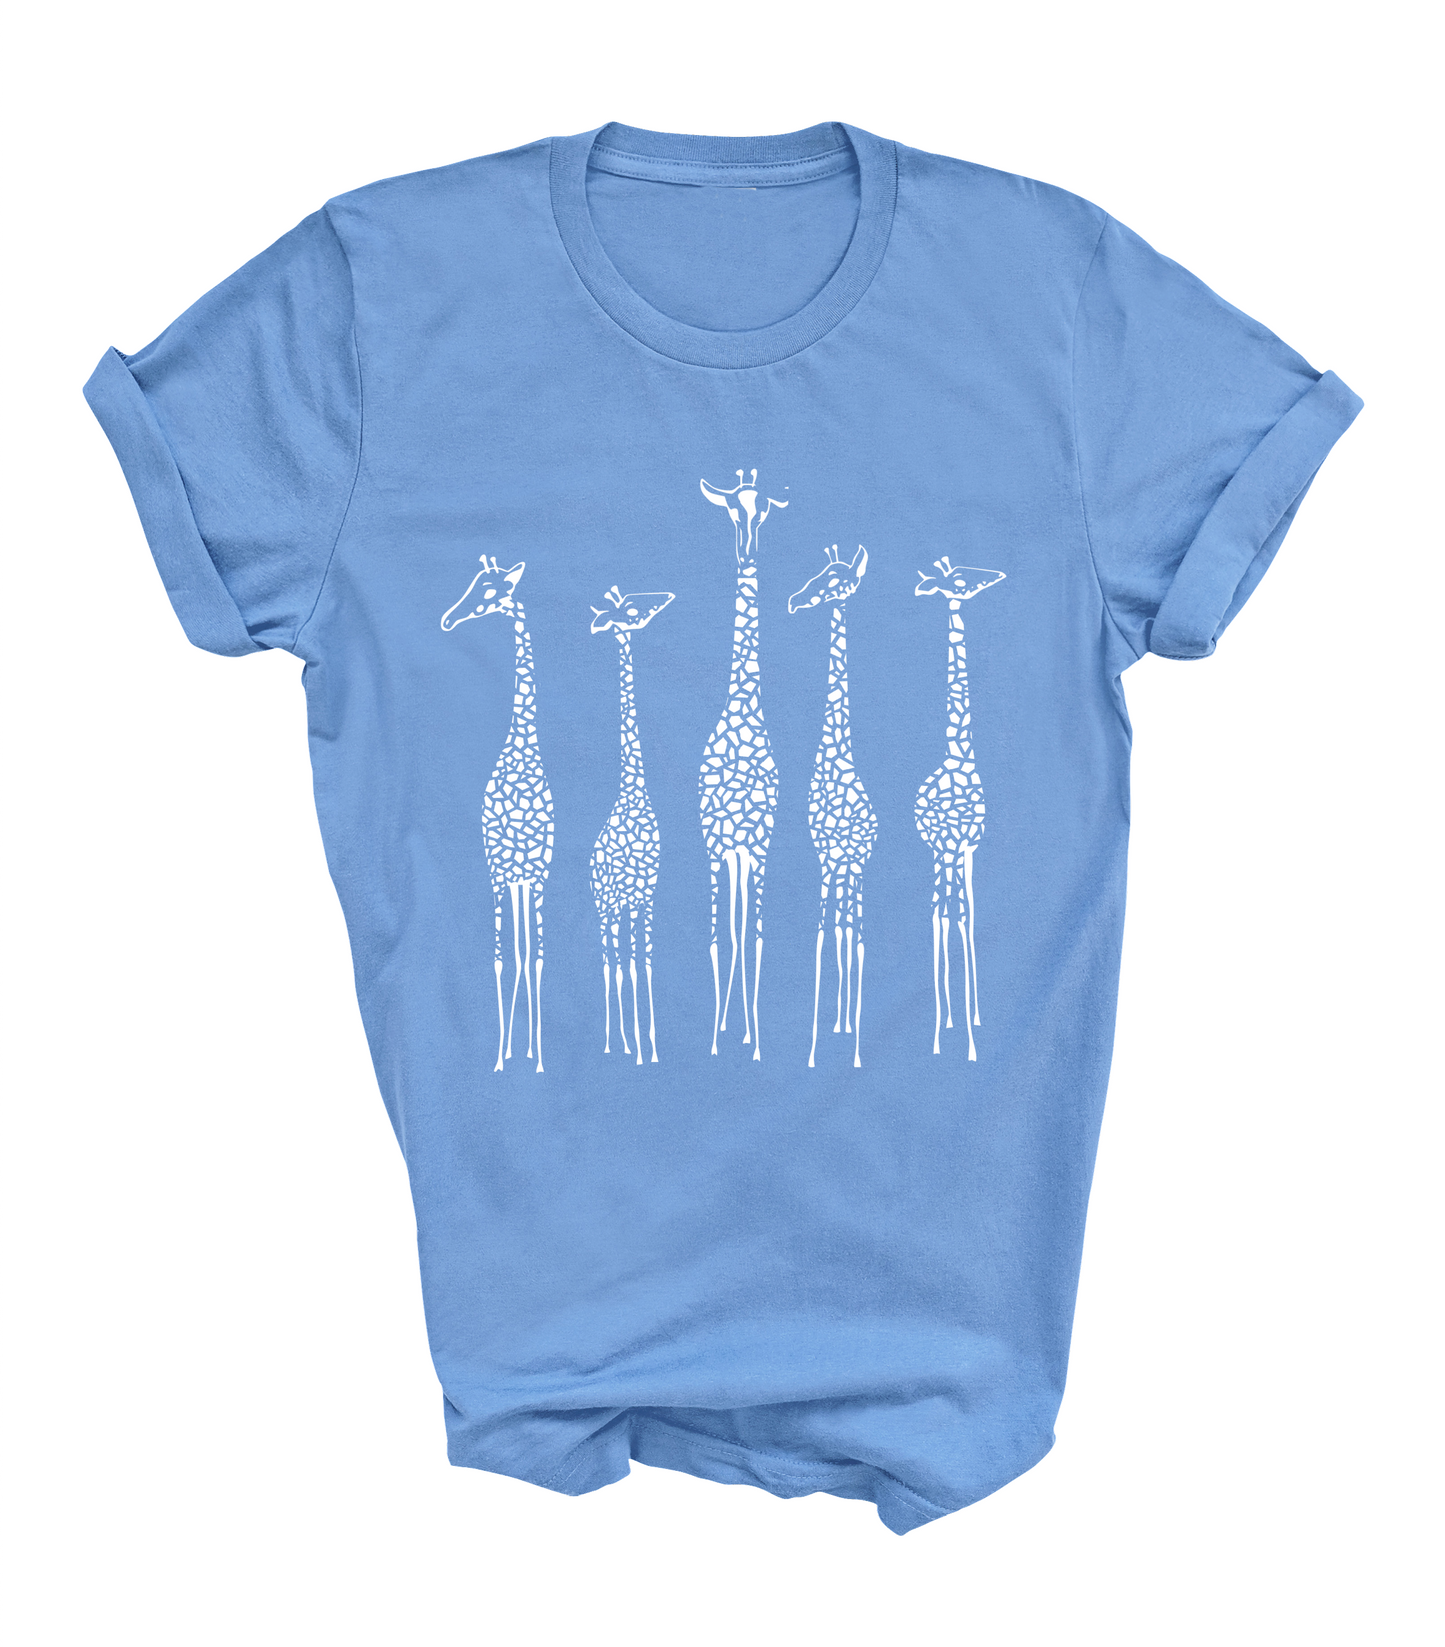 Giraffe Family Shirt/ Magical Vacation Themed Shirt/Toddler, Youth, Adult Sizes/ Mommy and Me Vacation Tees